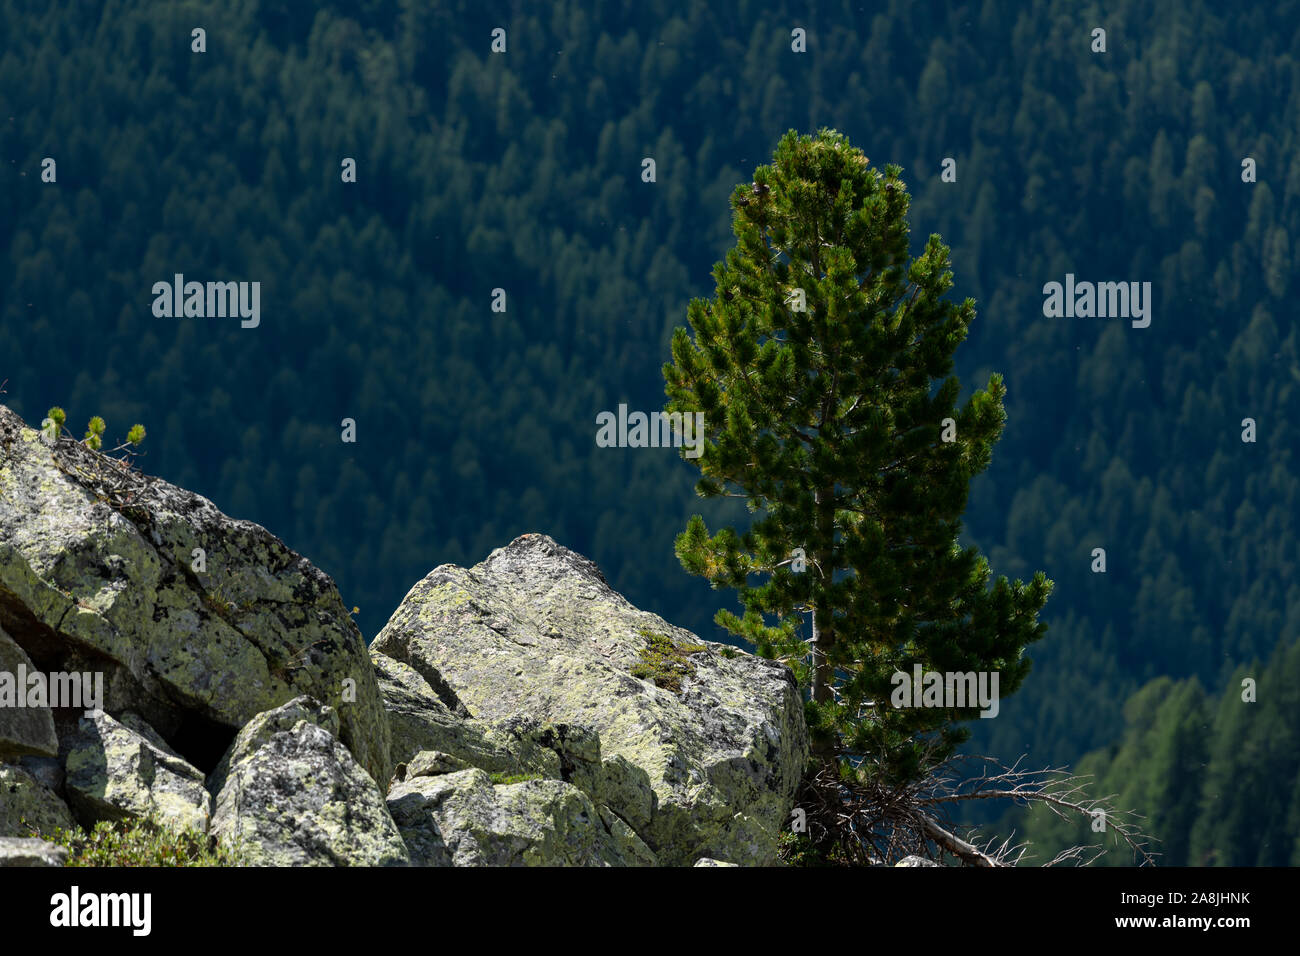 Stone pine (Pinus cembra) growing near a rock on a sunny day in summer (South Tyrol, Italy) Stock Photo